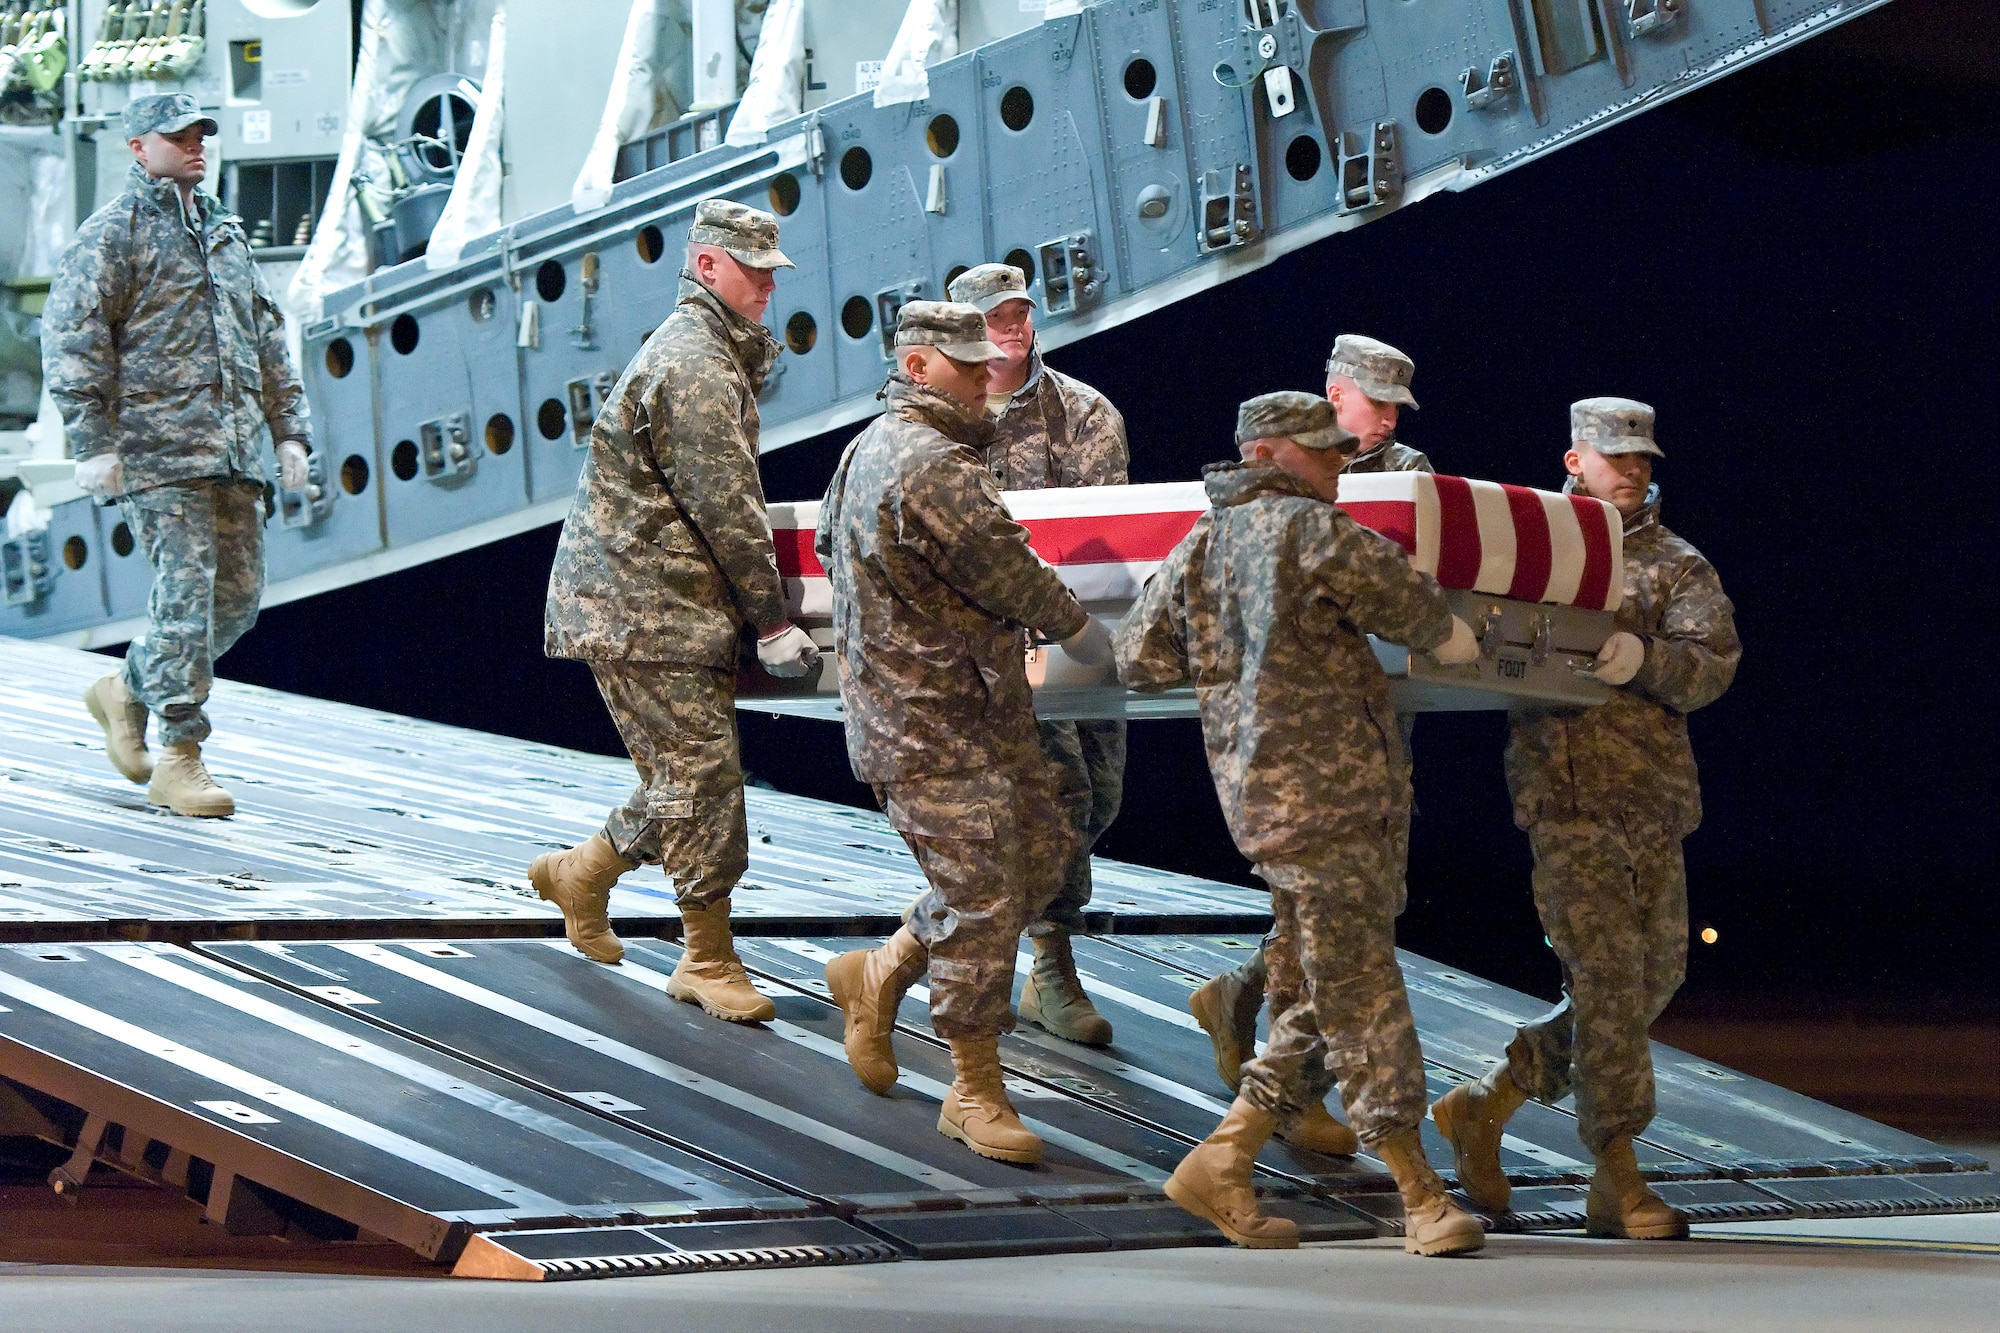 A U.S. Army carry team transfers the remains of Army Brig. Gen. Terence J. Hildner, of Fairfax, Va., at Dover Air Force Base, Del., Feb. 6, 2012. Hildner was assigned to the 13th Expeditionary Sustainment Command, Fort Hood, Texas. (U.S. Air Force photo/Roland Balik)
